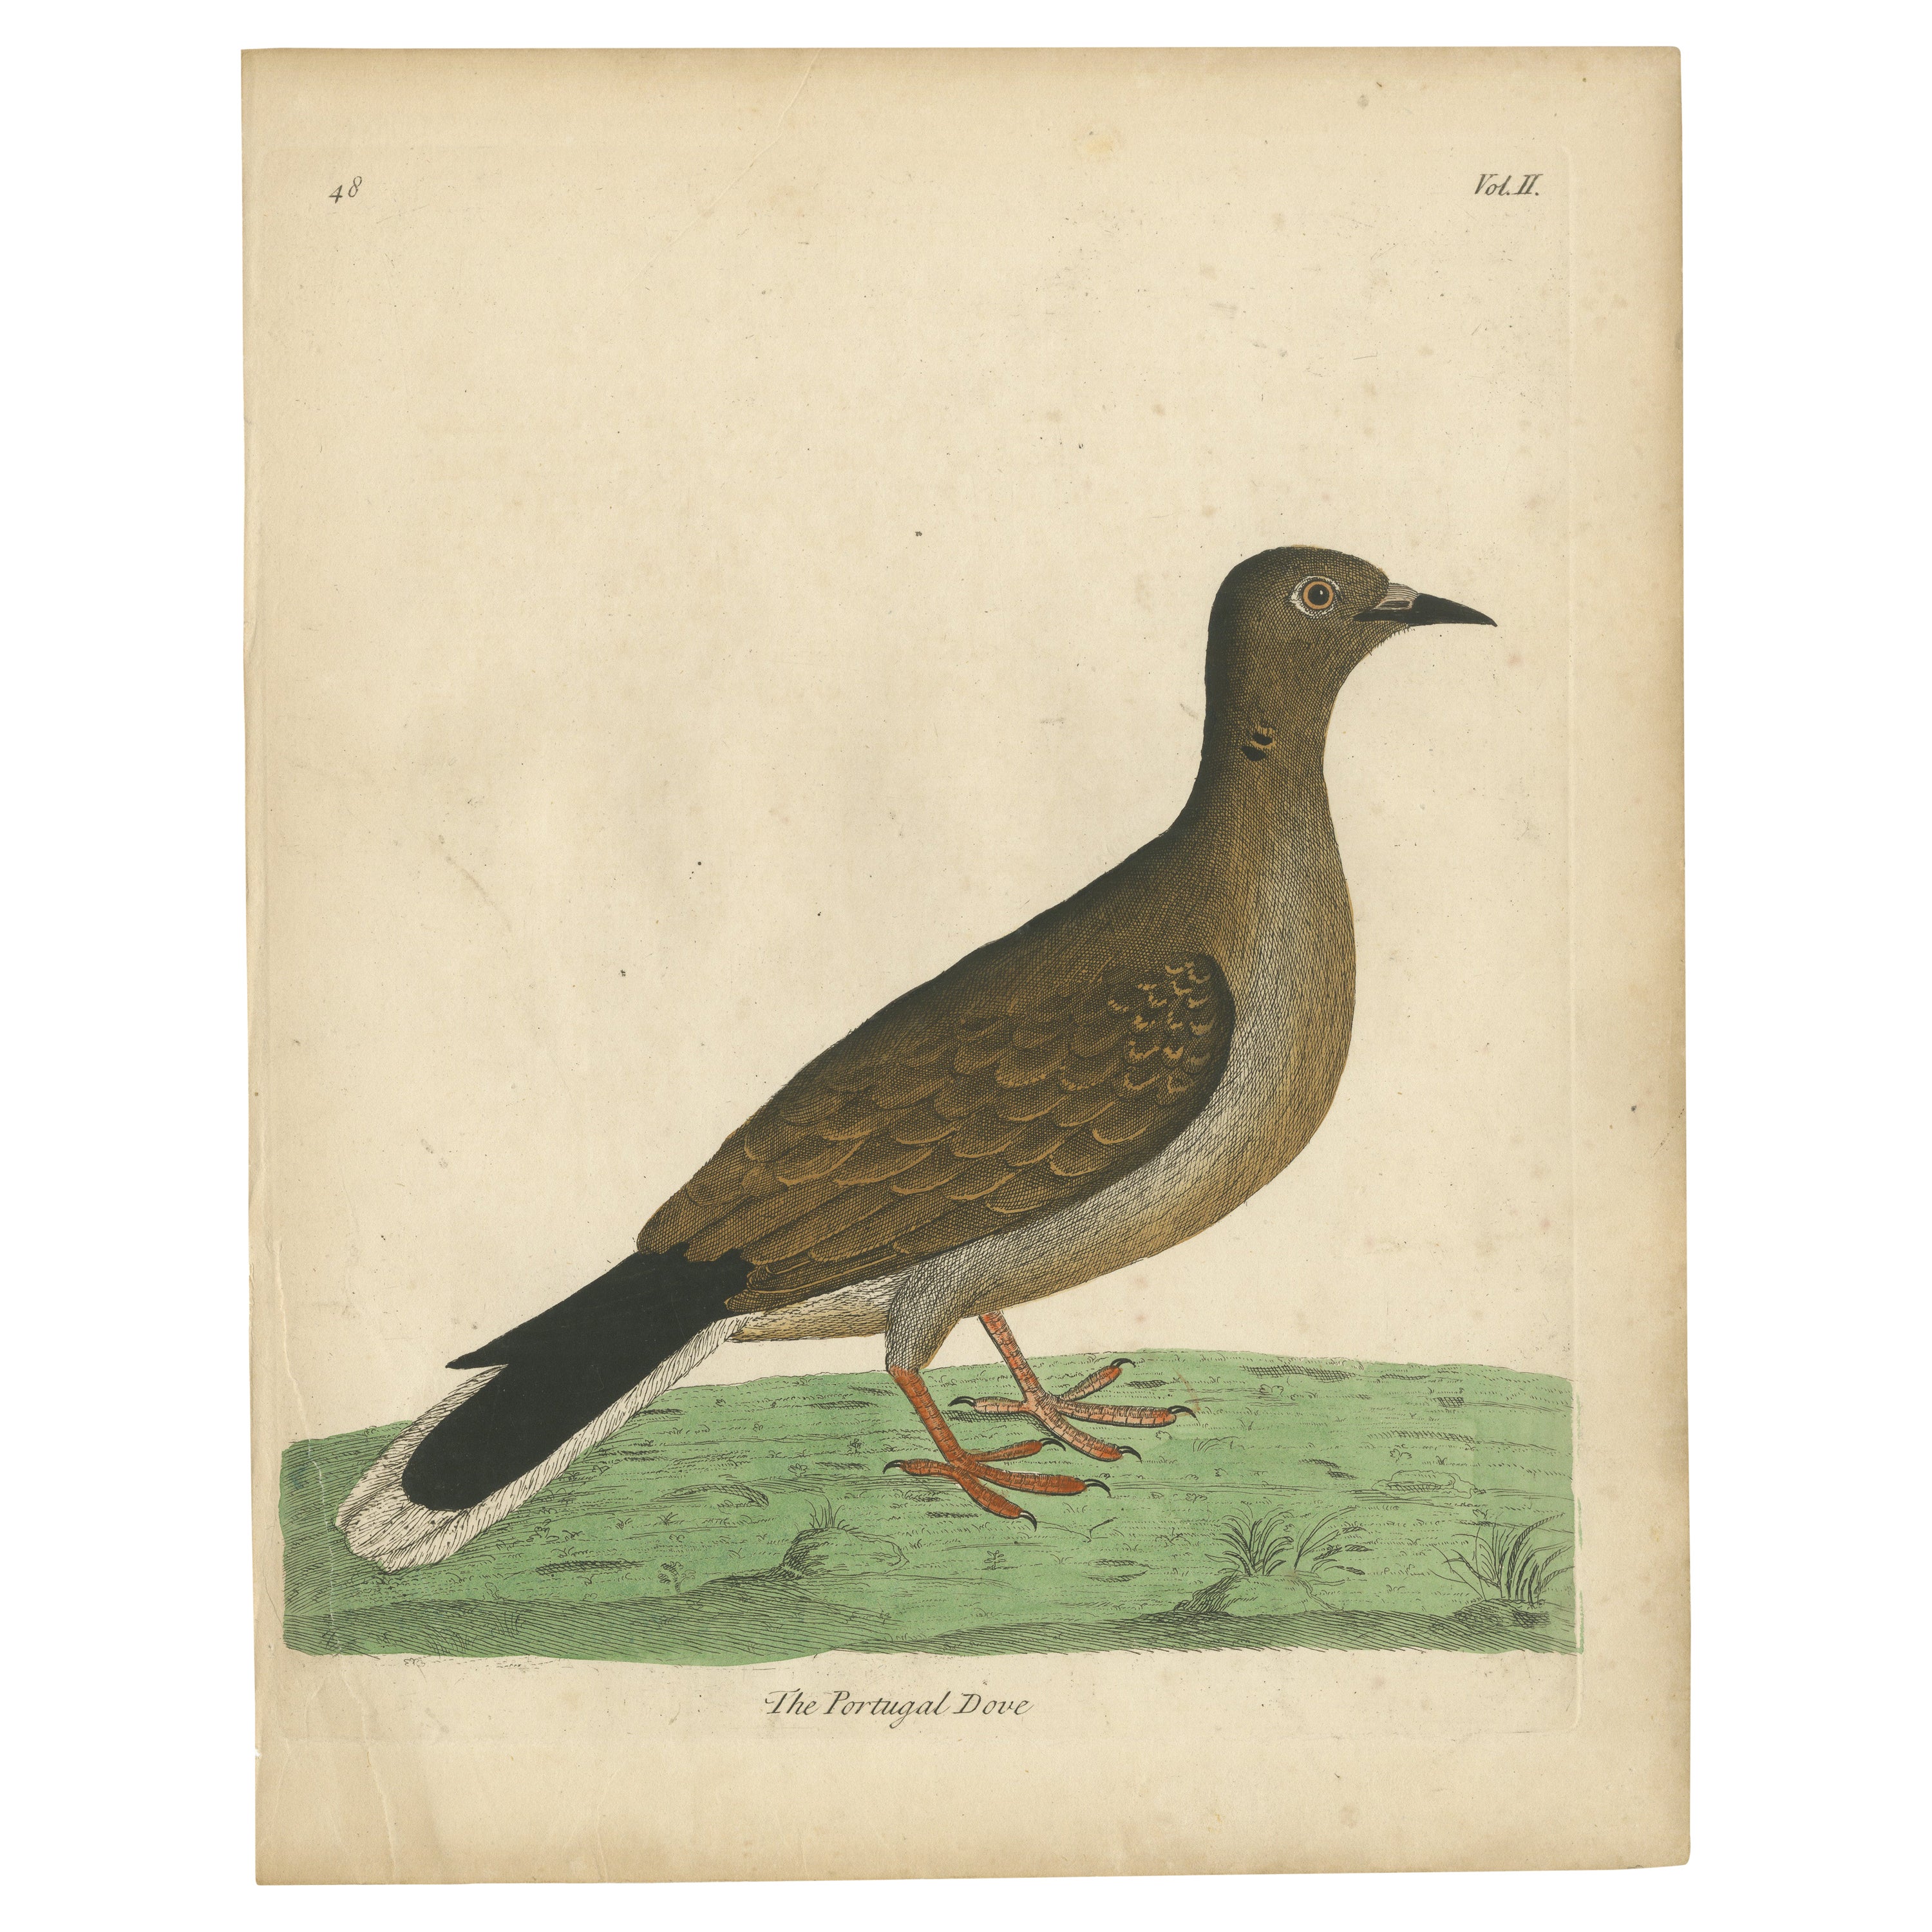 Antique Bird Print of a Portugal Dove For Sale